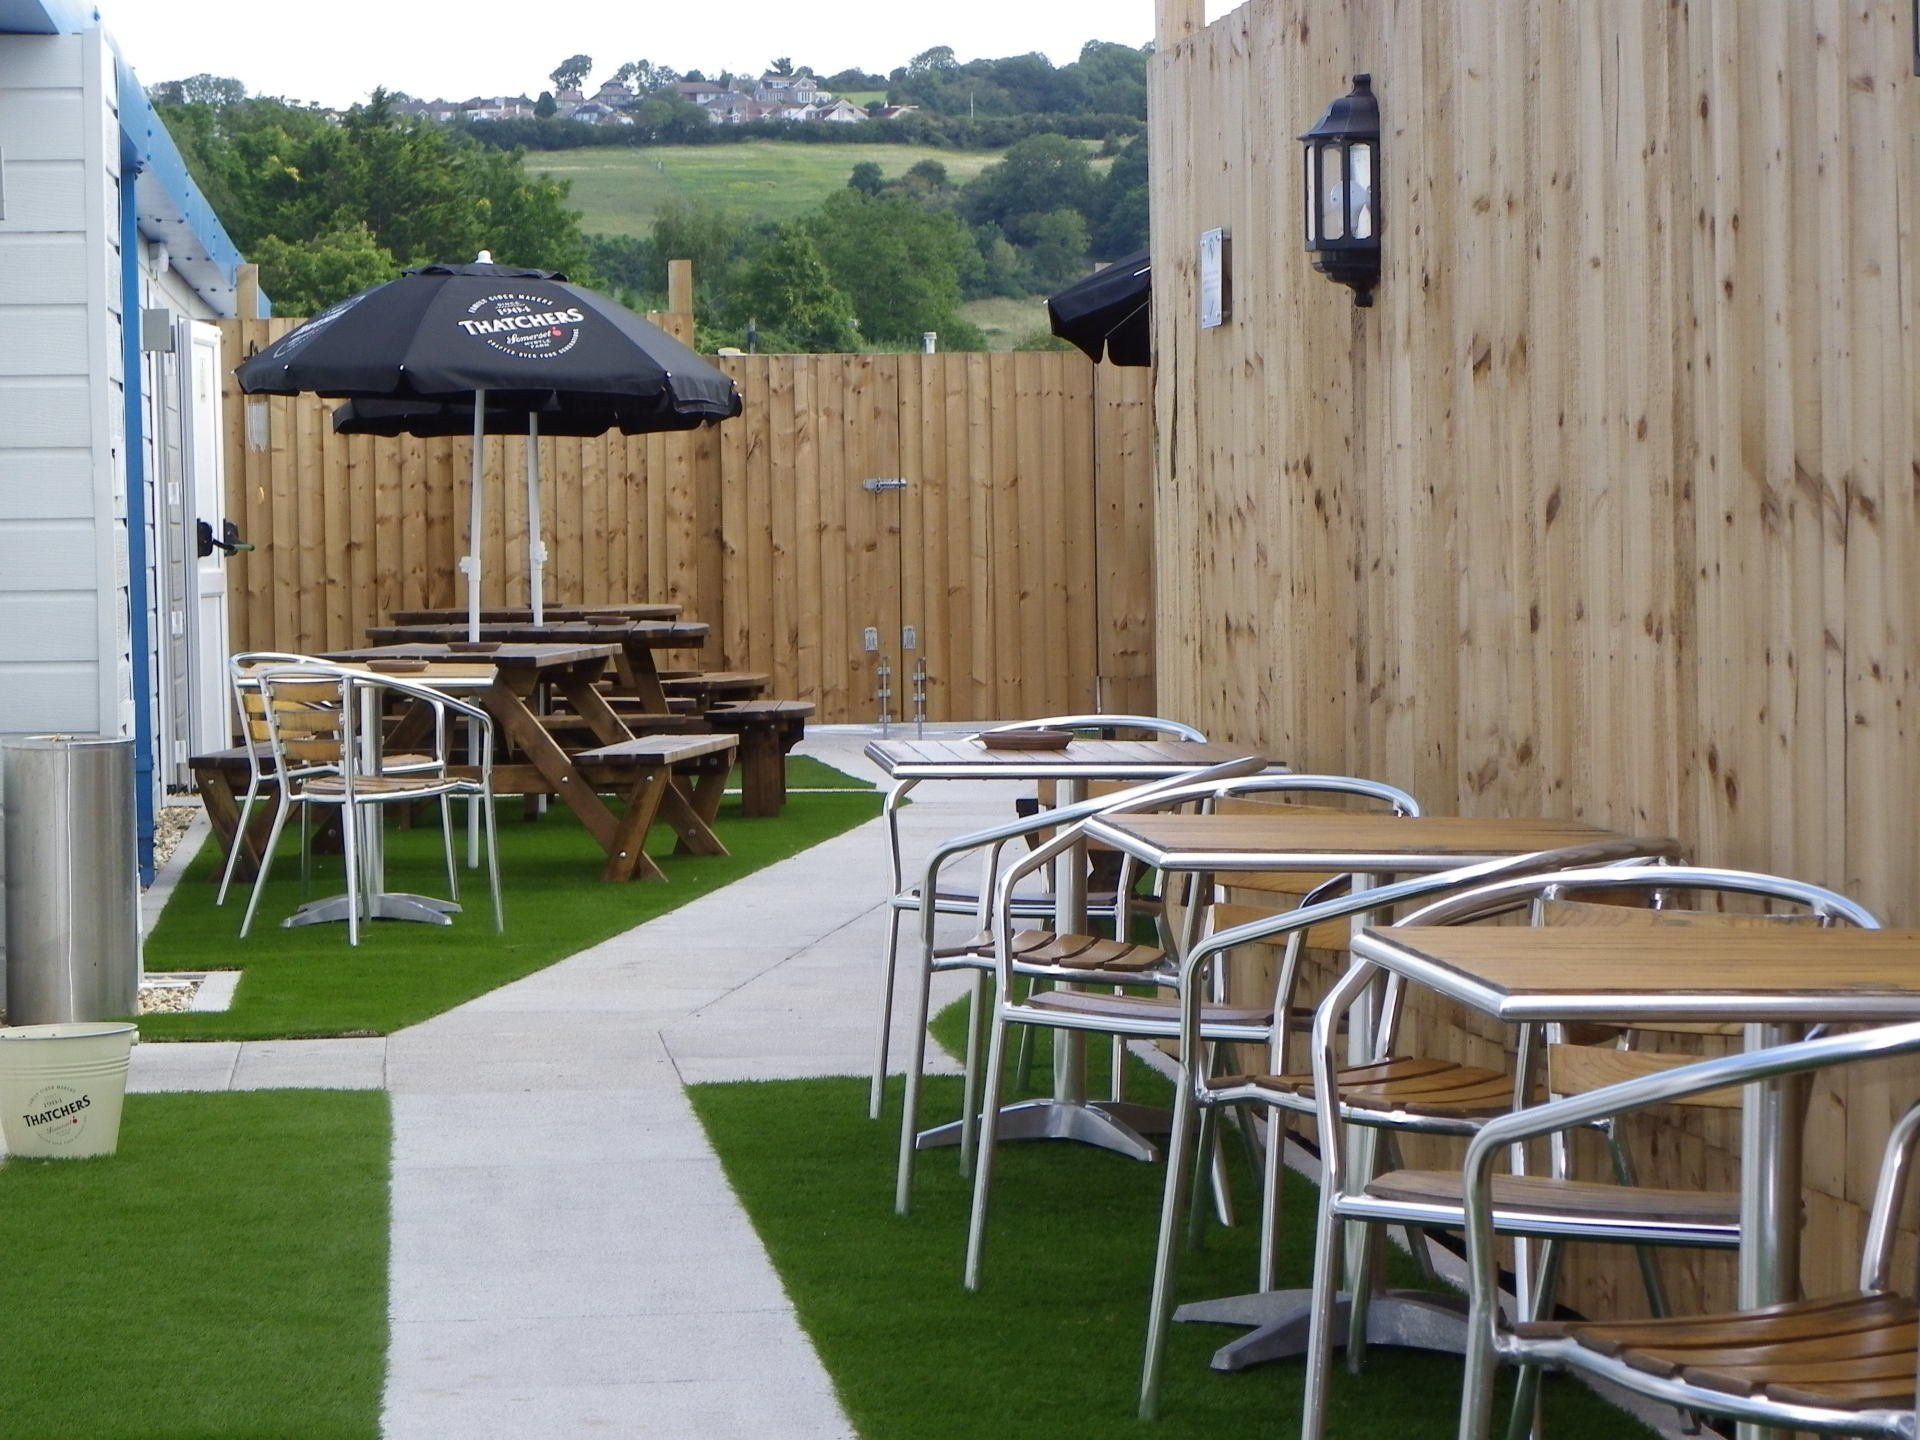 Outside seating area at our holiday park club near Weston-super-Mare.